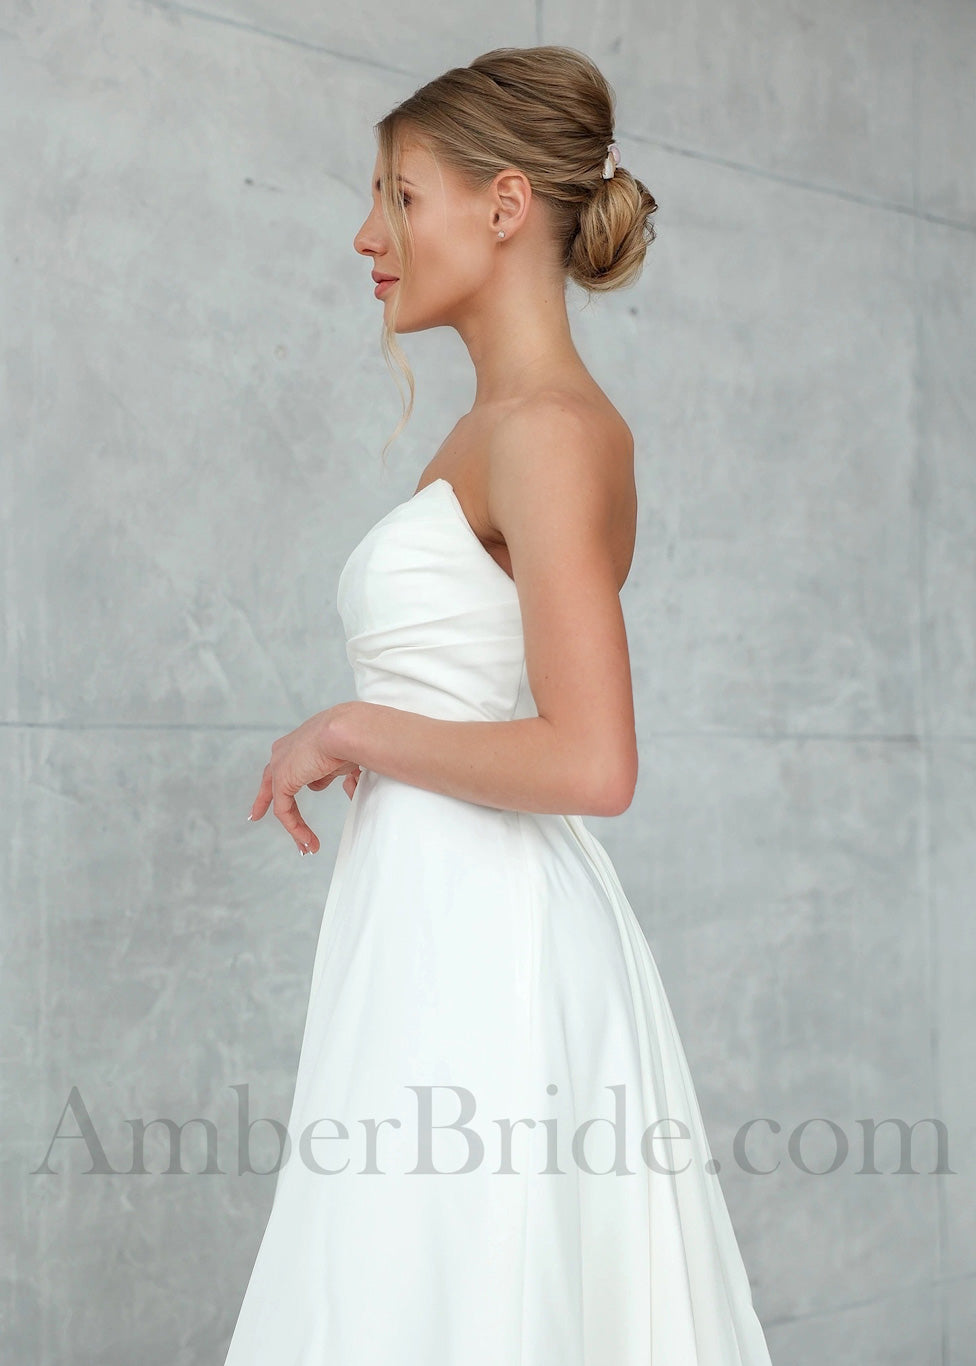 Satin A-Line Wedding Dress with Strapless Sweetheart Neckline and Low Back